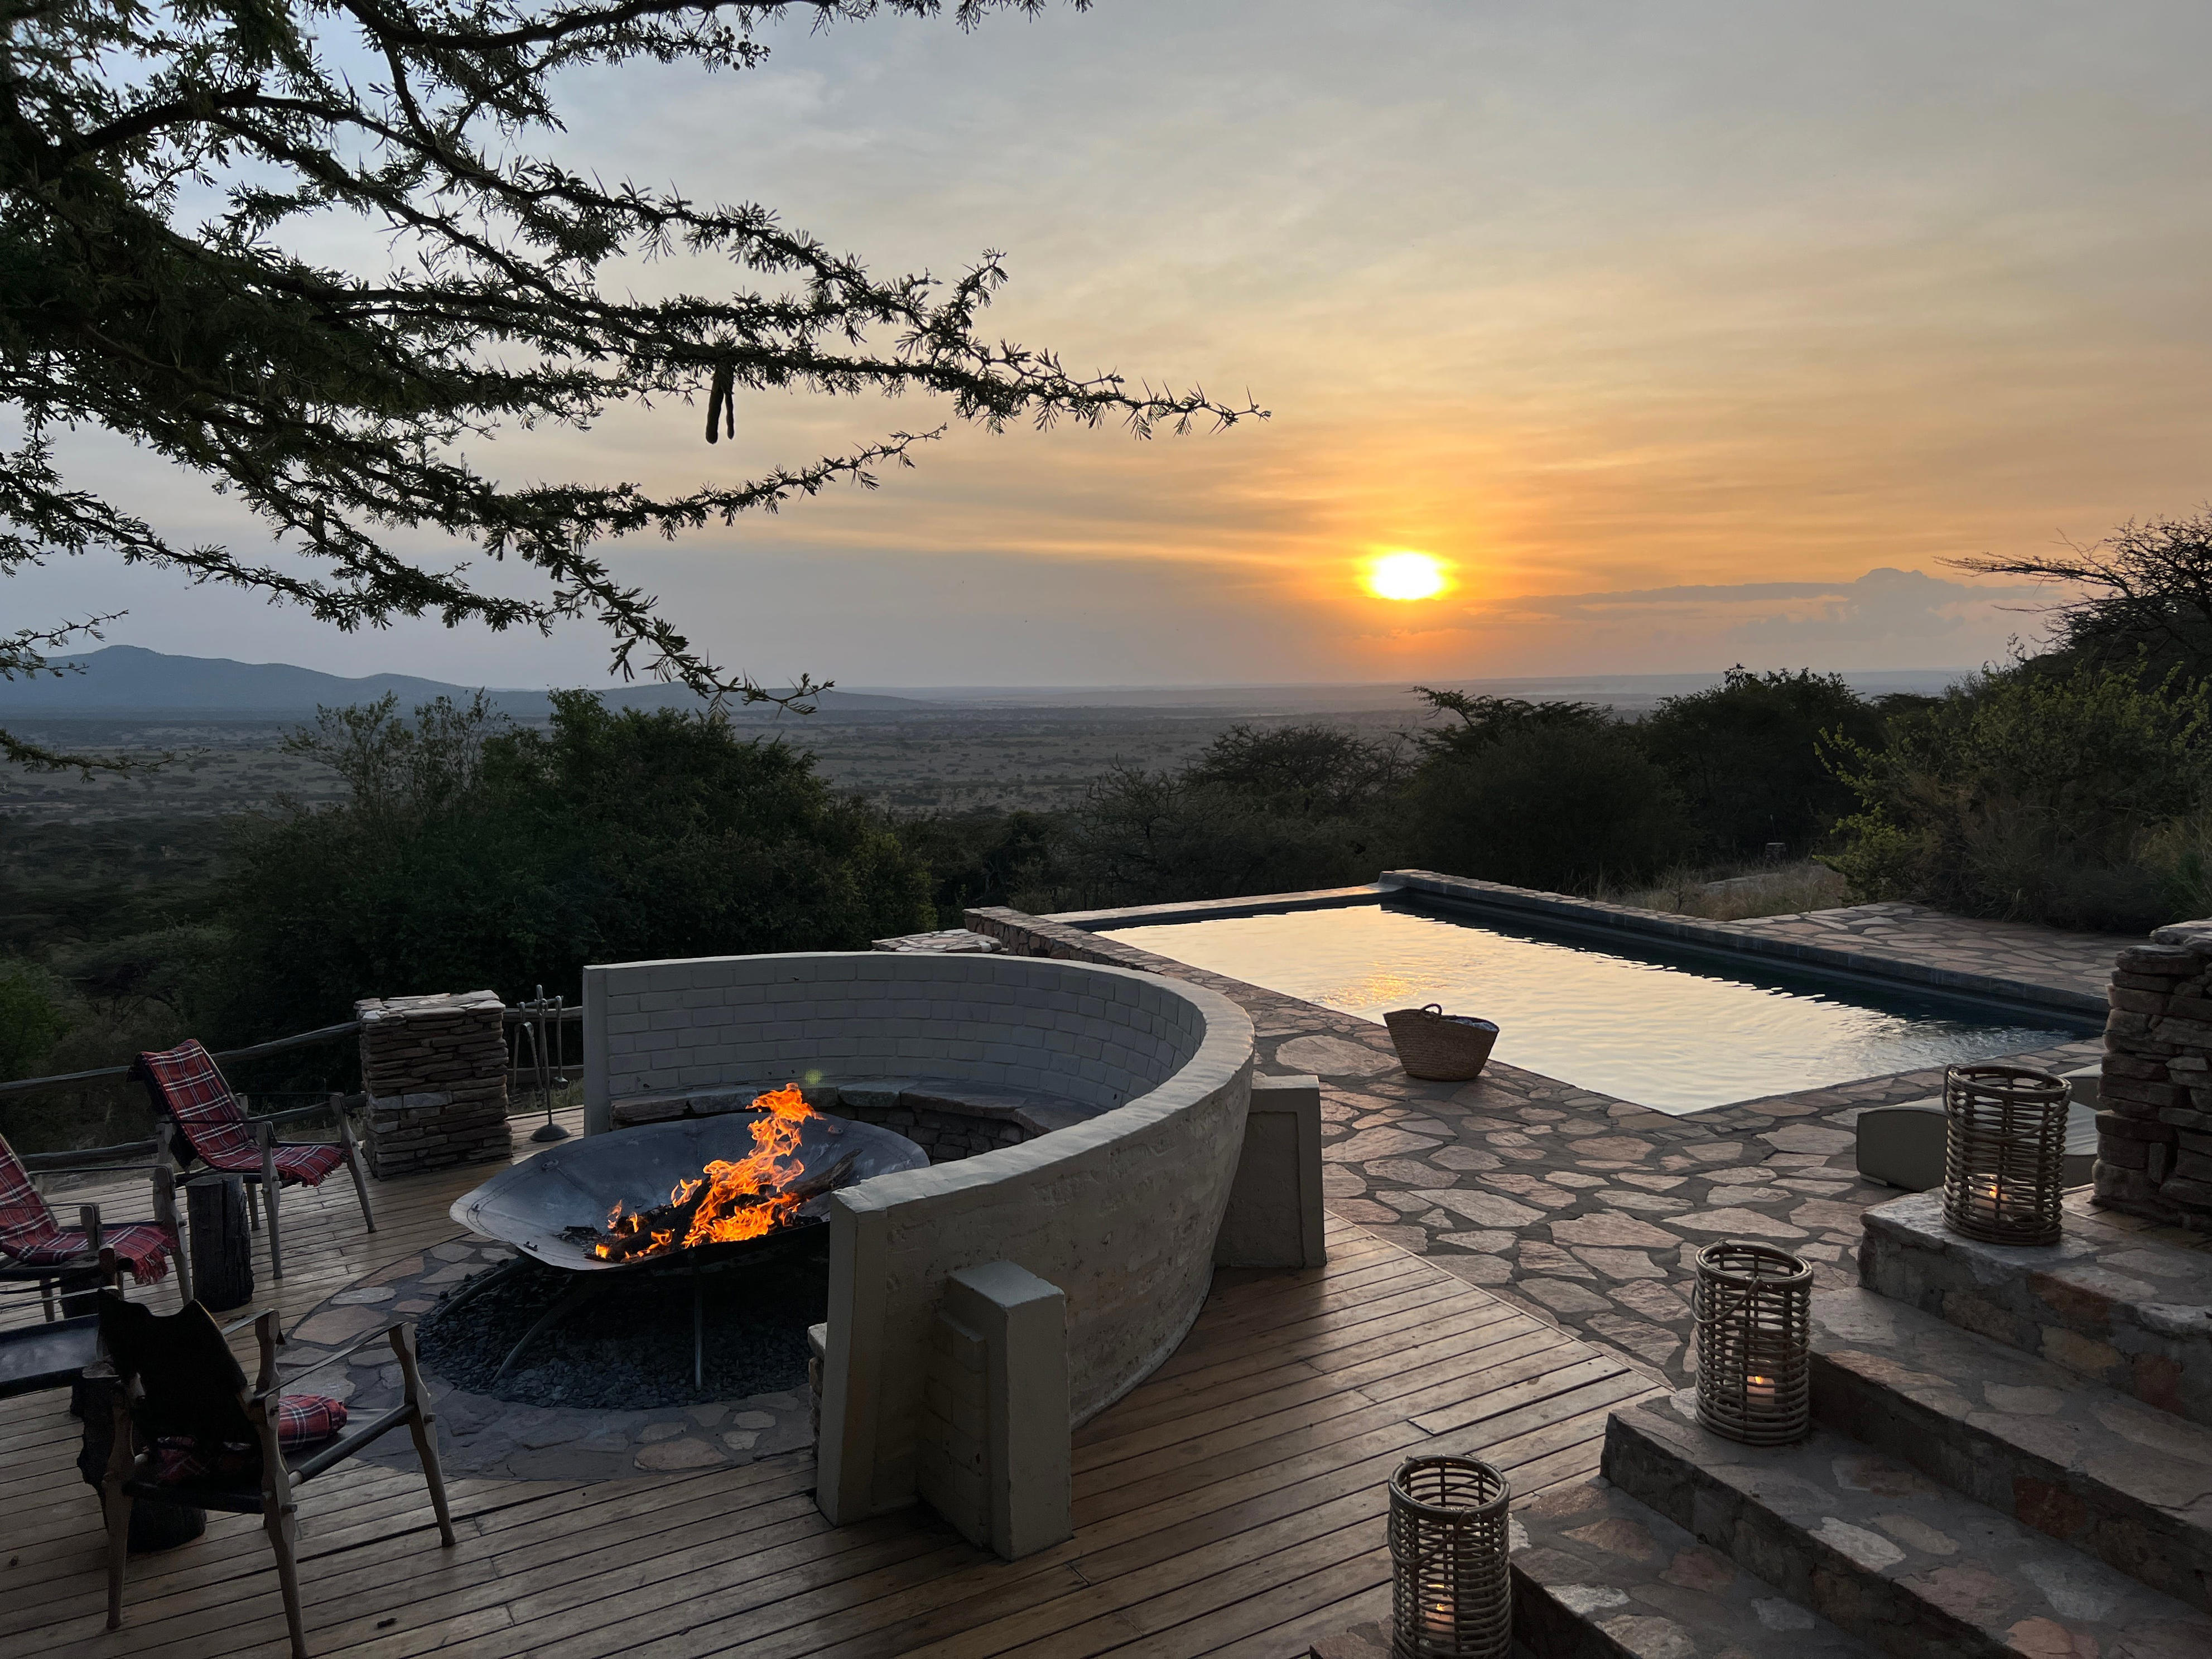 <p>I saw a Travelzoo deal for an all-inclusive safari at <a href="https://taasalodge.com/">Taasa Lodge</a>, a five-star luxury safari in Tanzania.</p><p>The deal was $6,000 for two people for a whole week — the lodge is usually $12,950 for two for seven nights. It was still a splurge, but I'd be saving more than 50% on a bucket-list experience.</p><p>The package came with seven nights of lodging, two safari activities a day, three daily meals, and drinks.</p><p>Still, we spent more than the original advertised price. There are obligatory "daily government park fees" and "daily concession fees" that added about $893 per person to our bill.</p><p>We also had to take a regional flight to get to Taasa, which was more expensive than my rental car in South Africa.</p><p>To redeem the Travelzoo deal, we had to complete our booking through a specific travel agency.</p><p>We ended up opting for an all-inclusive add-on package which includes the $893 fees above, domestic airfares from Arusha to Taasa (which would already cost around $600), and our agency arranging our Tanzanian tourist visa and airport transfers. The add-on also included extra activities at the resort (more on that later).</p><p>Overall, we paid $1,715 per person on top of the $3,000 each for the lodge stay.</p><p>I hadn't anticipated paying so many extras, but it was nice to have someone take care of the logistics of getting to the resort.</p>